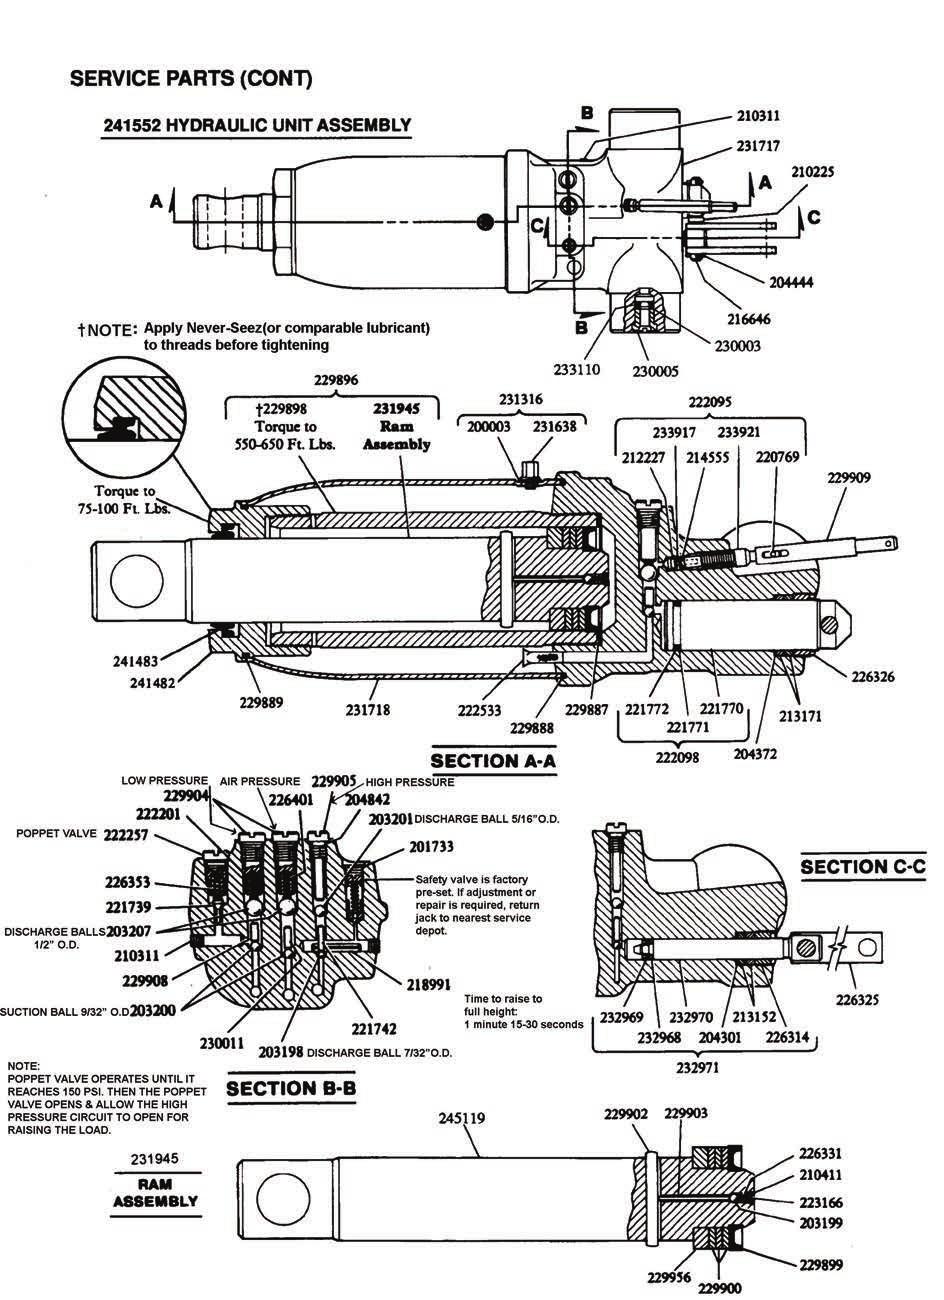 Model HW93662 Replacement Parts Illustration Part II - Hyd Unit (ref. parts list on pg.